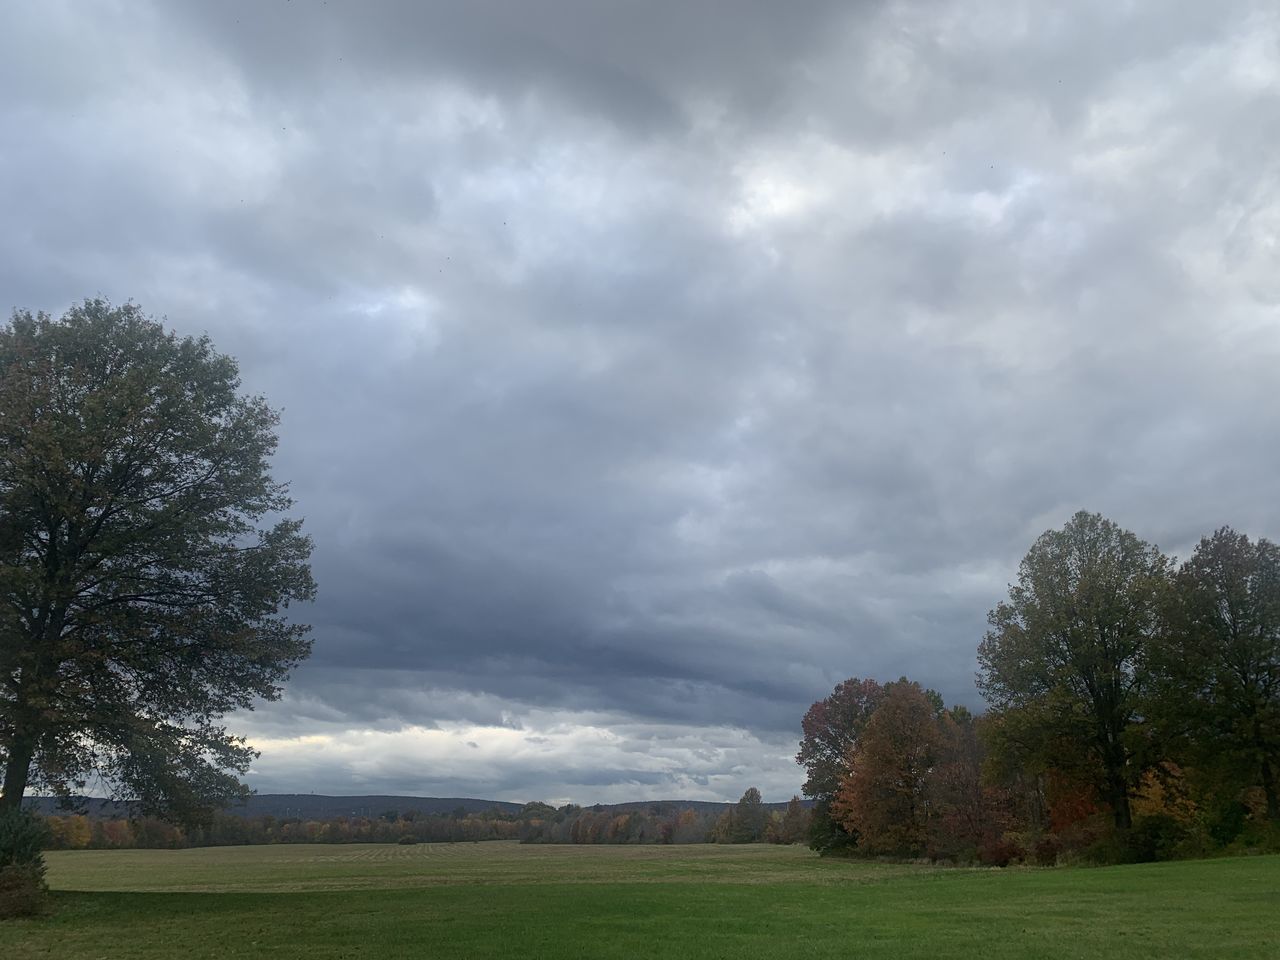 TREES ON FIELD AGAINST CLOUDY SKY